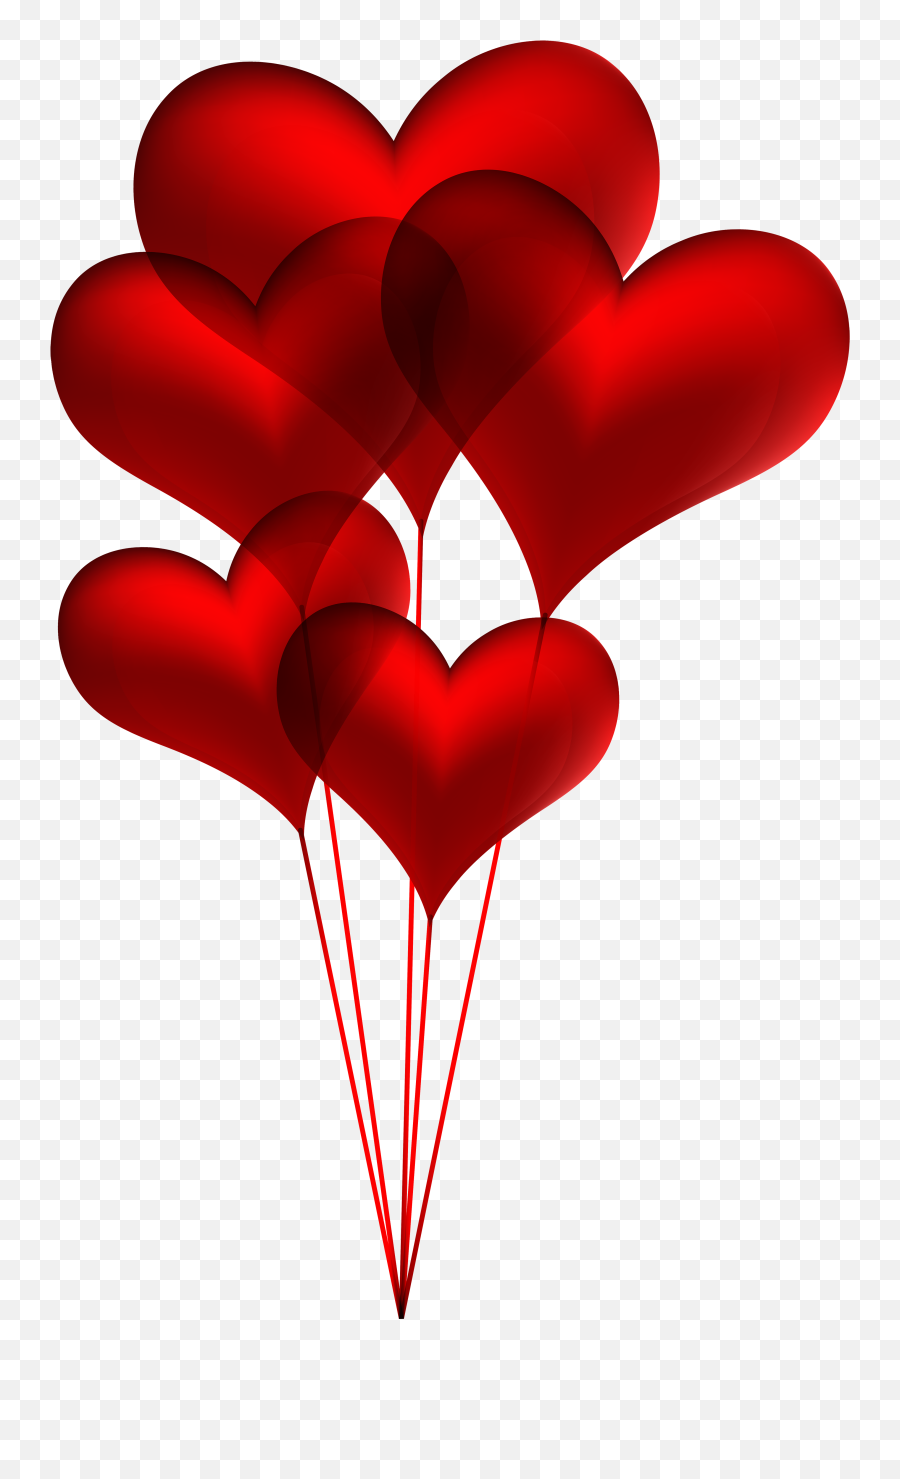 Library Of Red Heart Vector Library Download With No - Transparent Background Heart Balloon Clip Art Emoji,Red Heart Clipart